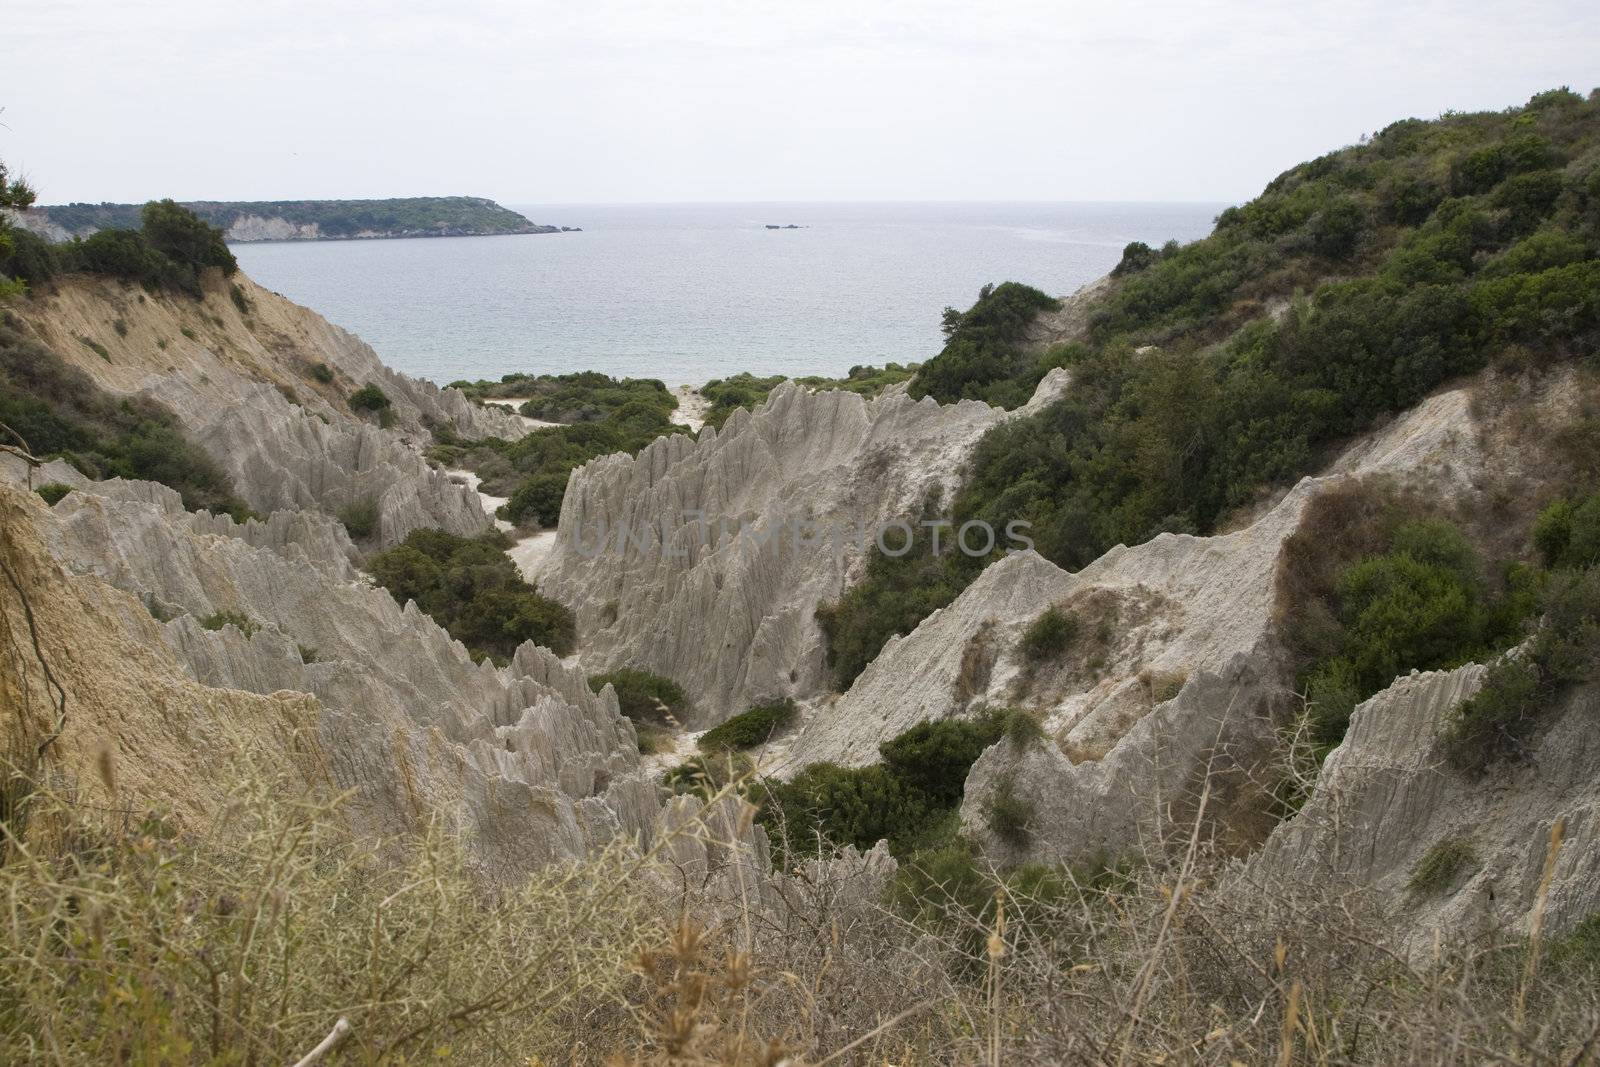 Eroded Clay Formations by MihaiDancaescu